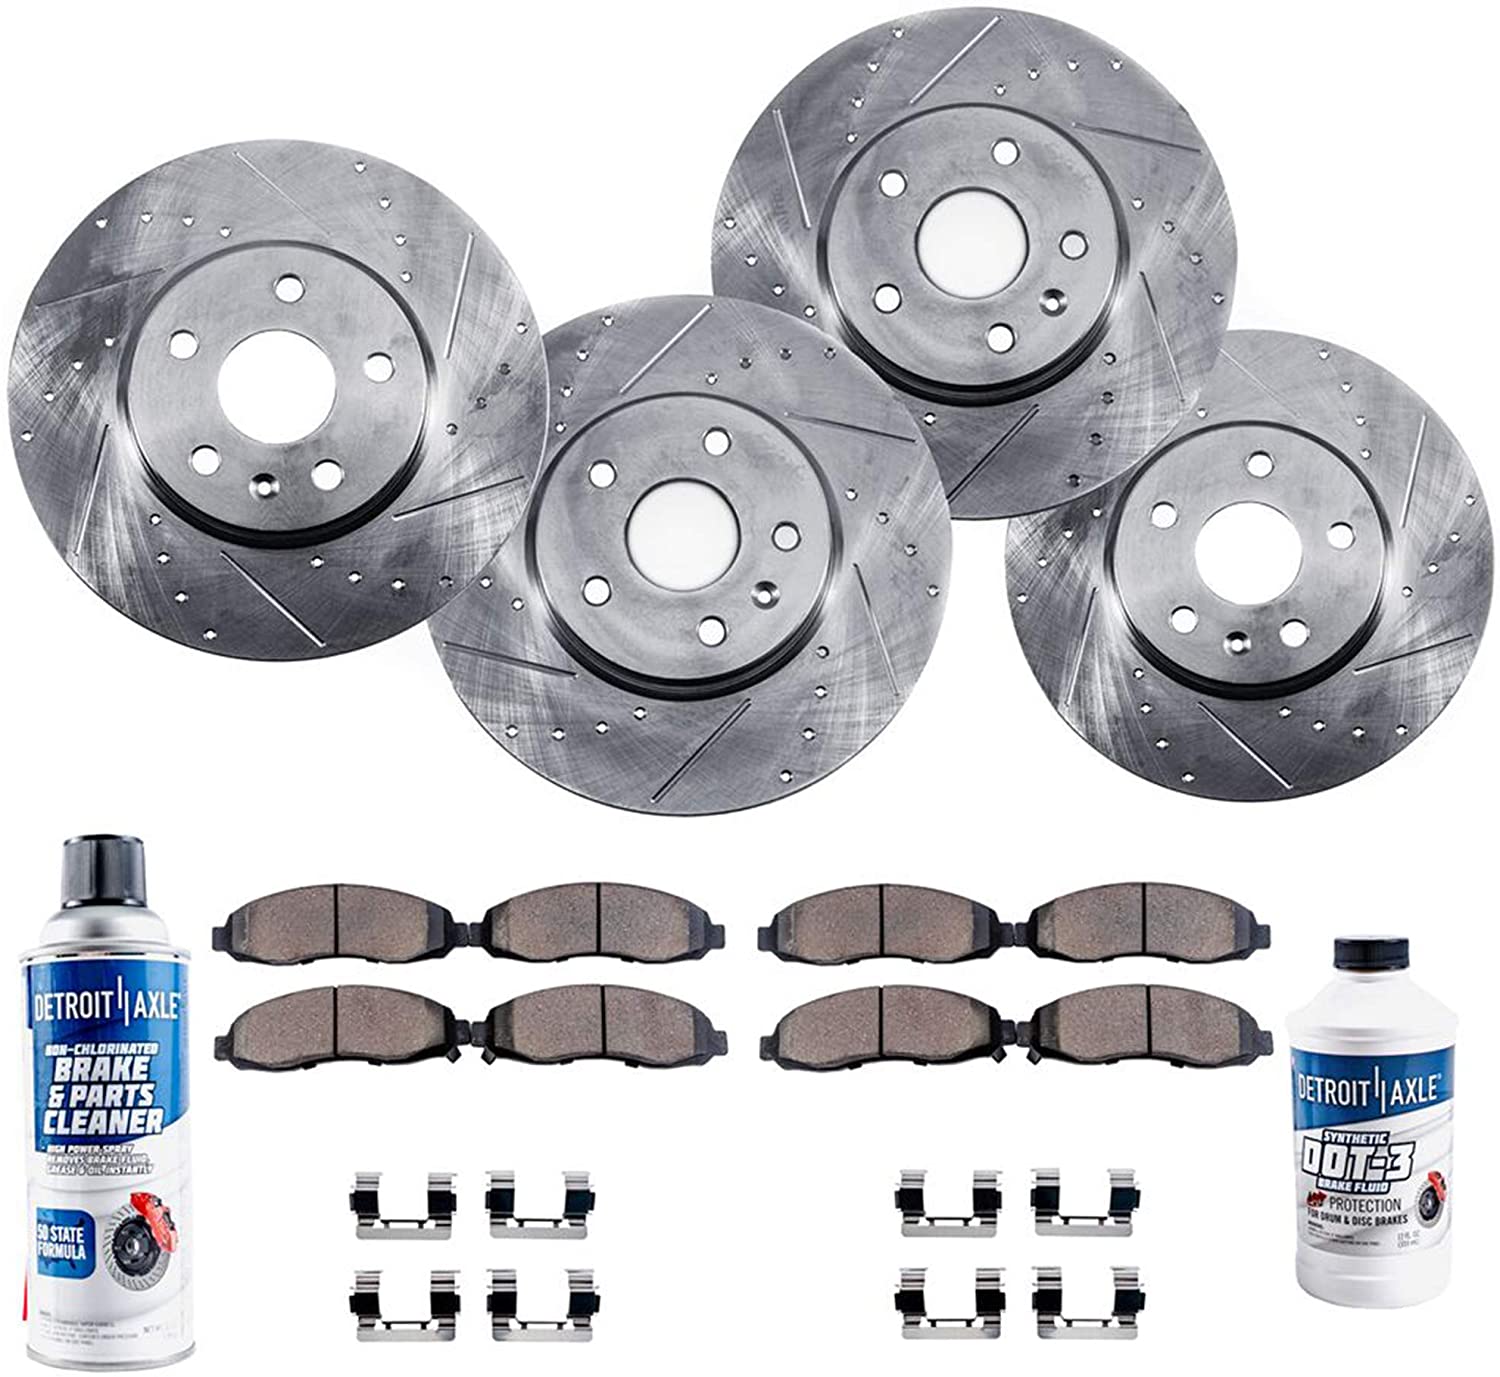 Detroit Axle - All (4) Front and Rear Drilled and Slotted Disc Brake Kit Rotors w/Ceramic Pads & Brake Kit Cleaner & Fluid for 2007-2014 Kia Sedona - [2007-2008 Hyundai Entourage]